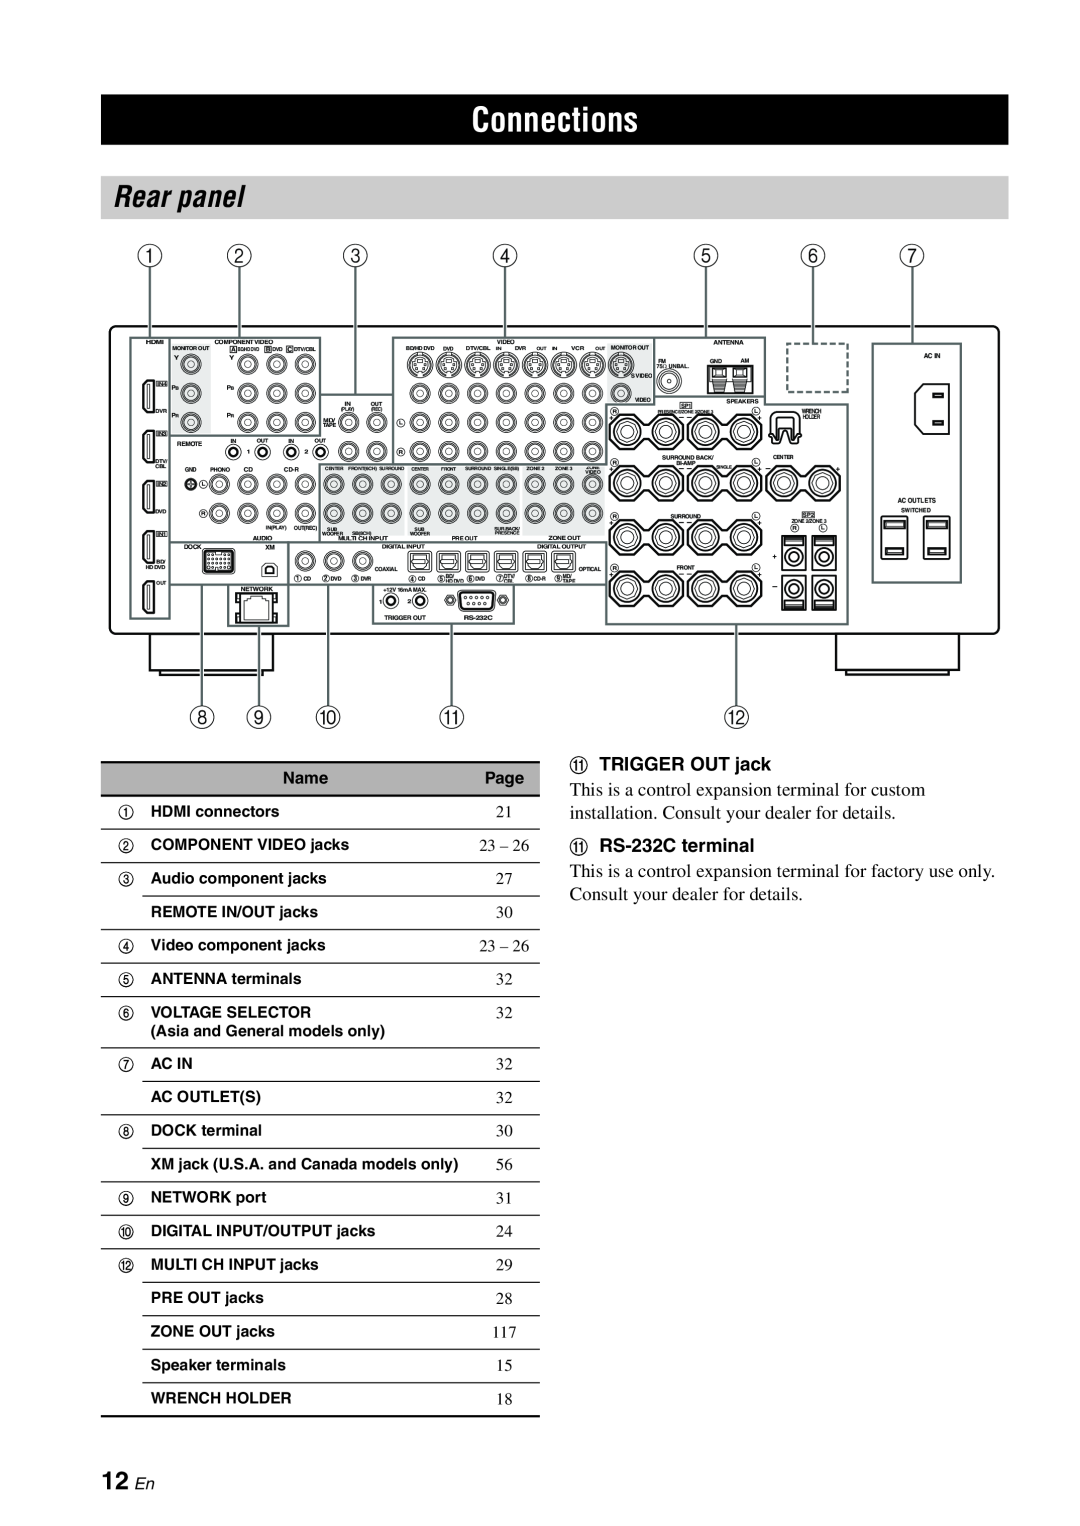 Yamaha RX-V3800 owner manual Connections, Rear panel, 12 En, A TRIGGER OUT jack, A RS-232C terminal 